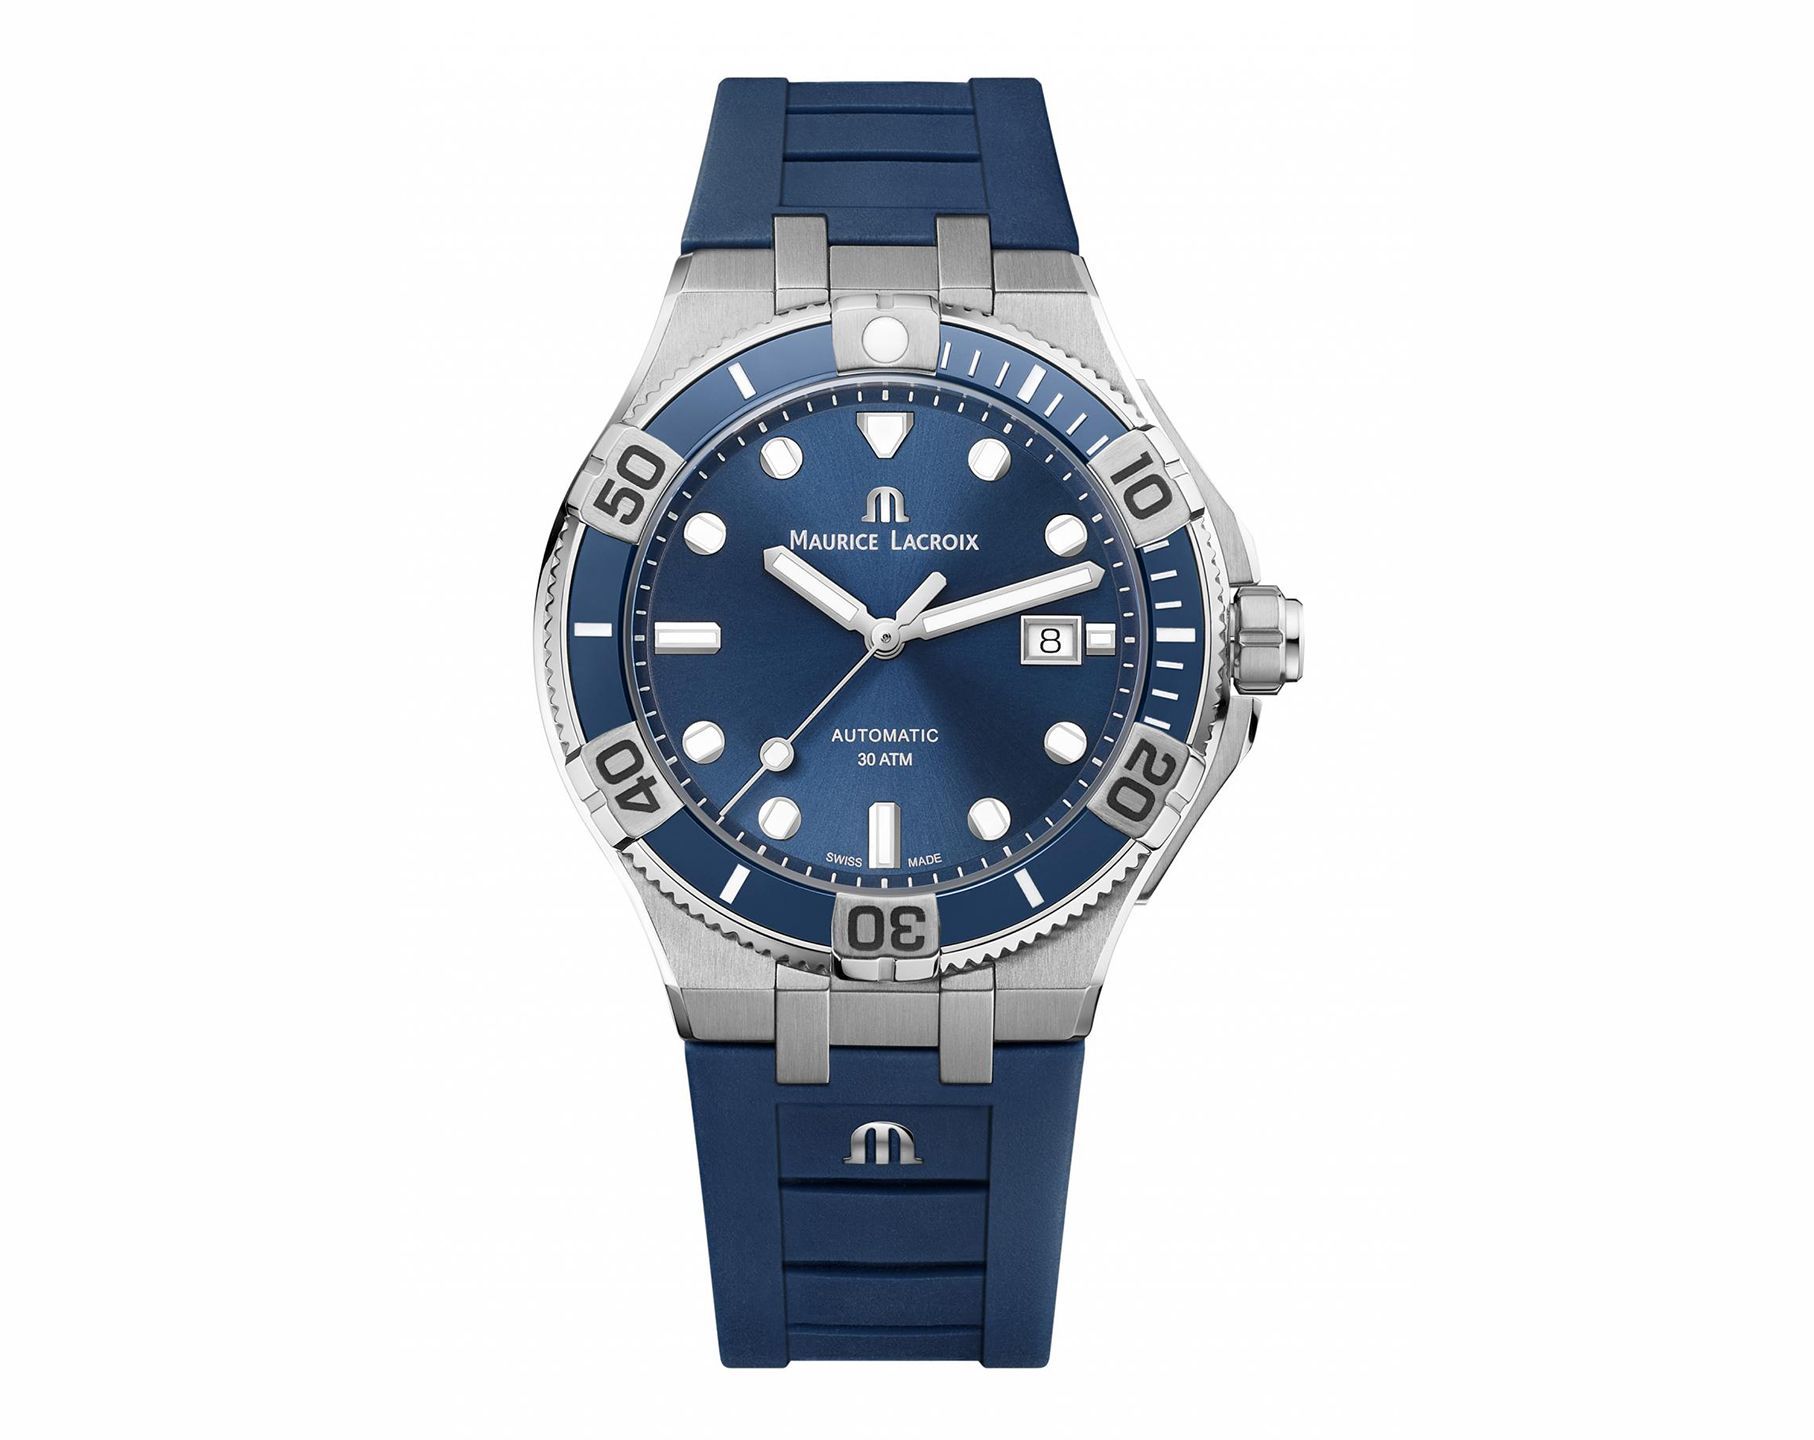 Maurice Lacroix  43 mm Watch in Blue Dial For Men - 4